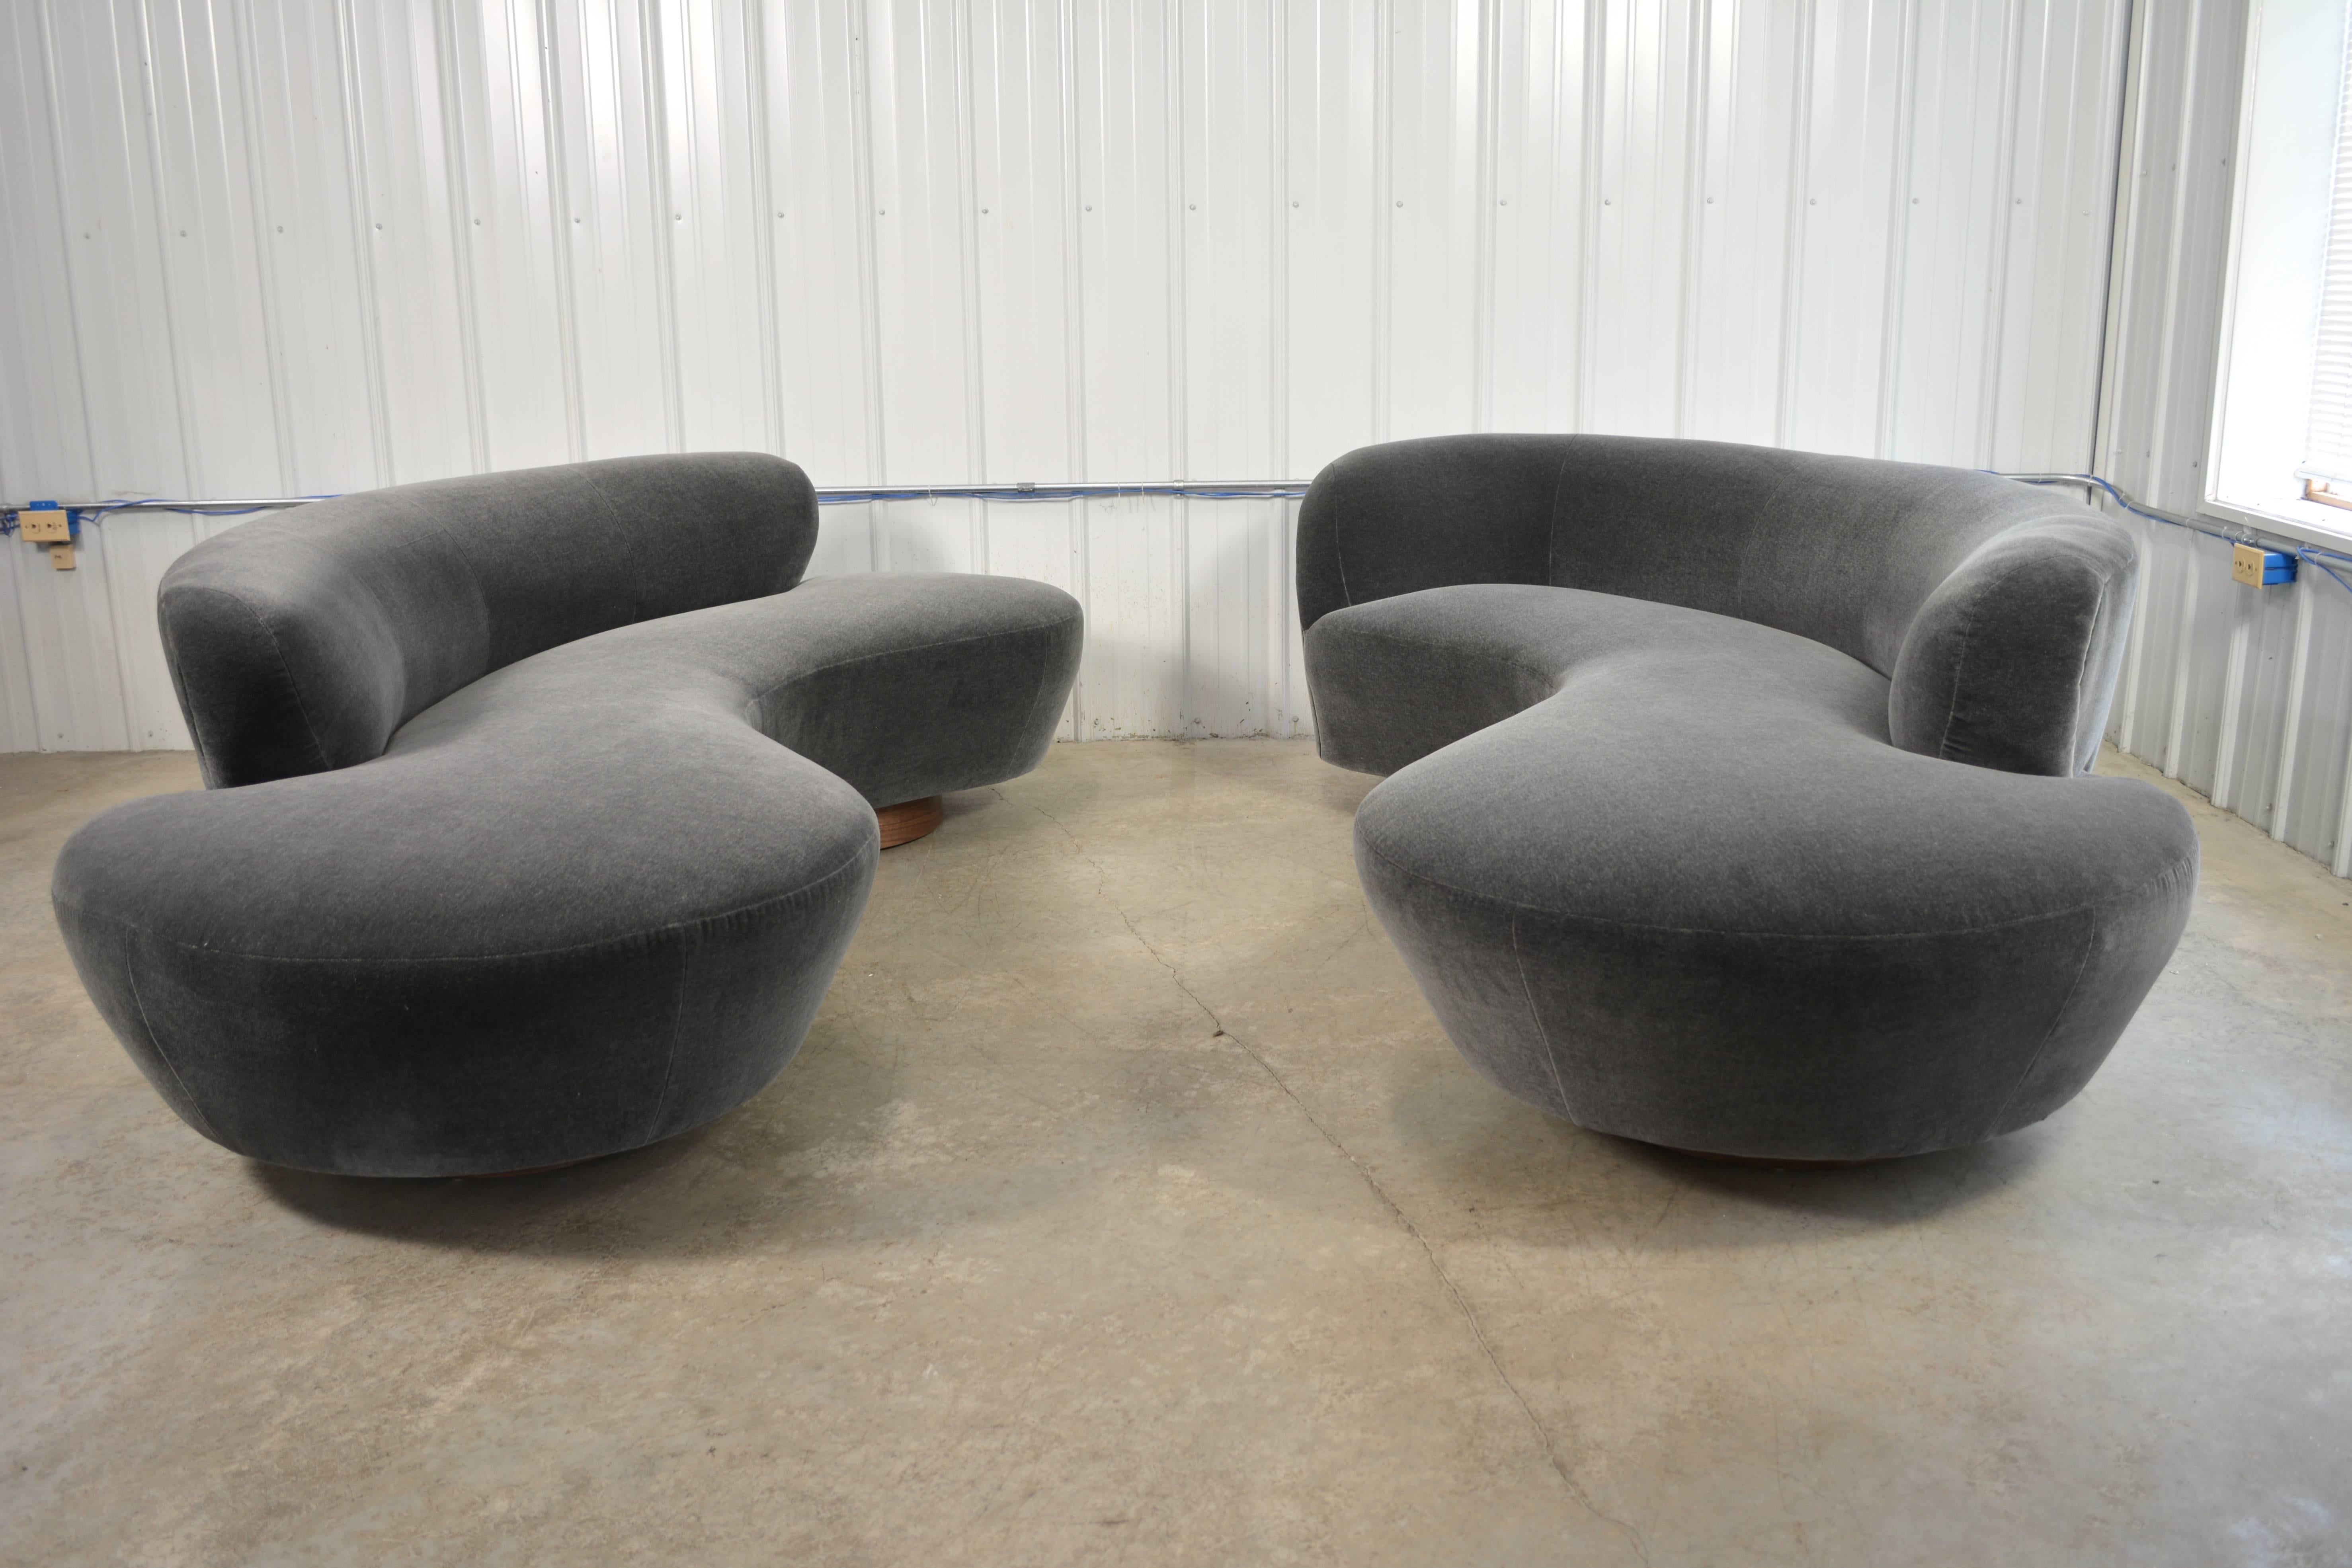 Sofa designed by Vladimir Kagan for Directional. Circular walnut plinth bases. Newly recovered in mohair. Lucite support plate. Directional label. Fabric samples available. A second sofa is available.